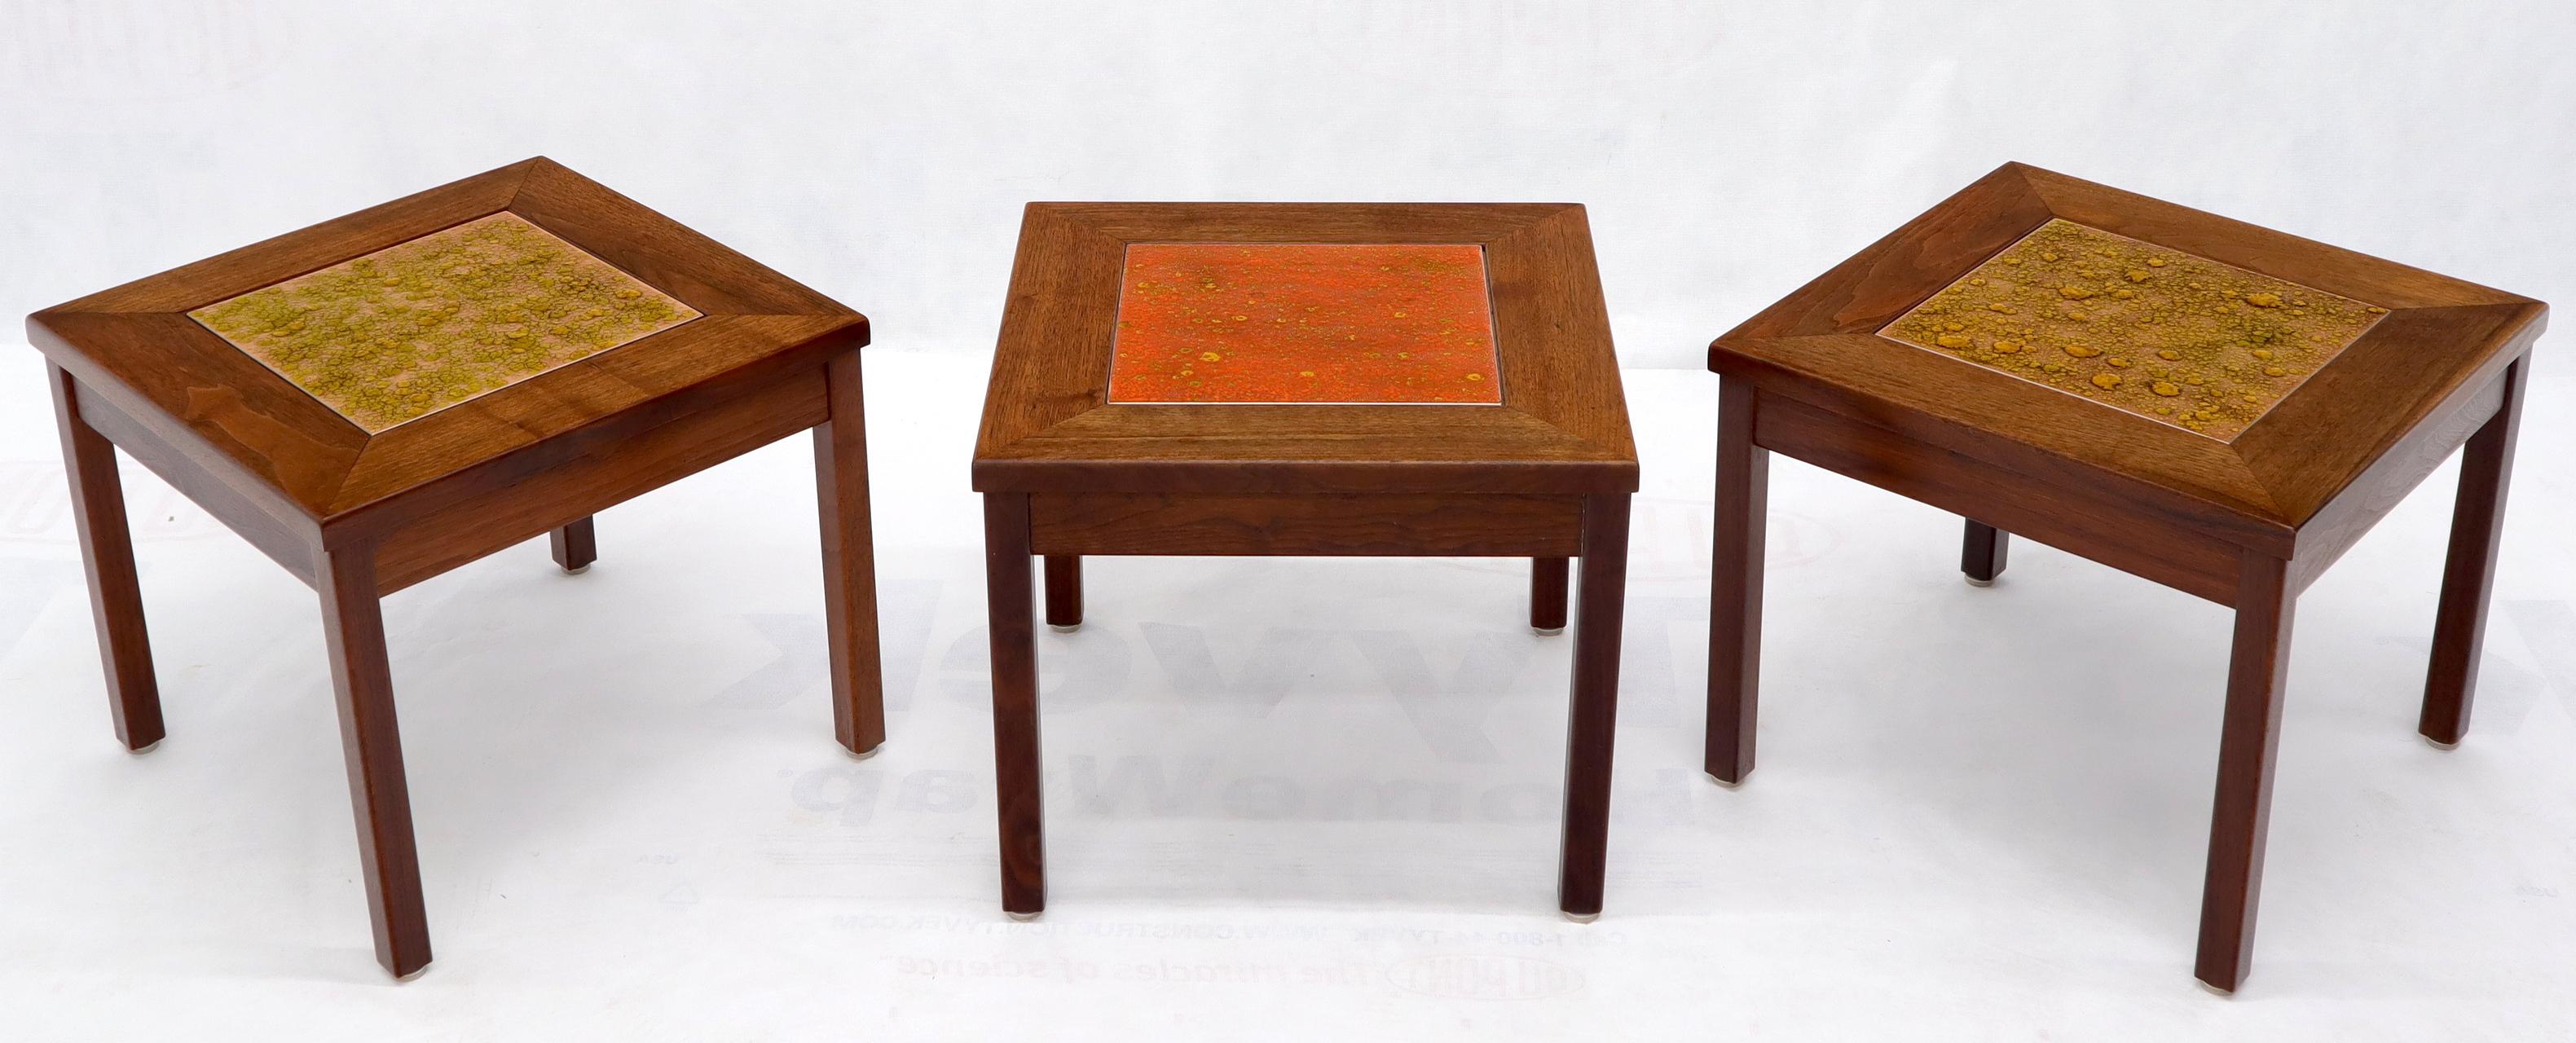 American Brown and Saltman Set of Three End Side Tables in Dark Oiled Walnut Art Tile Top For Sale